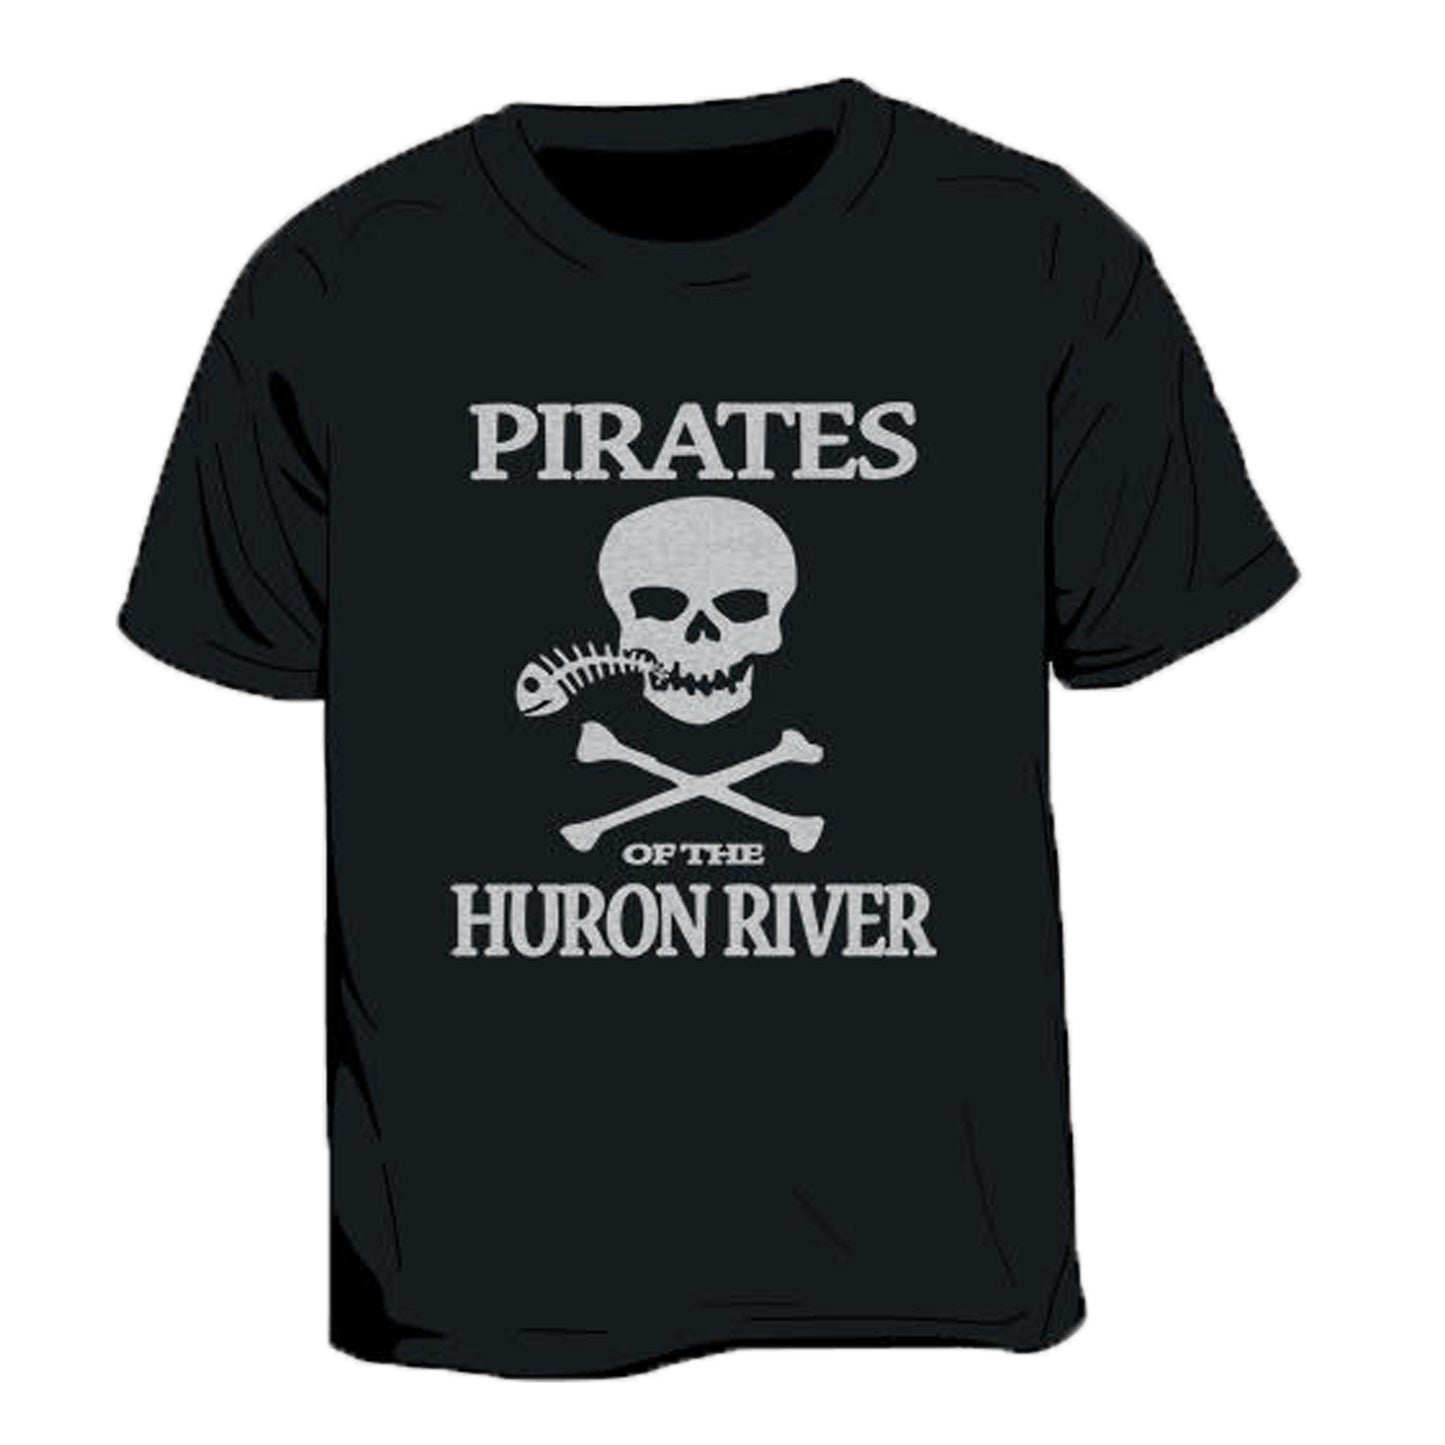 Pirates Of The Huron River Kid's T-Shirt